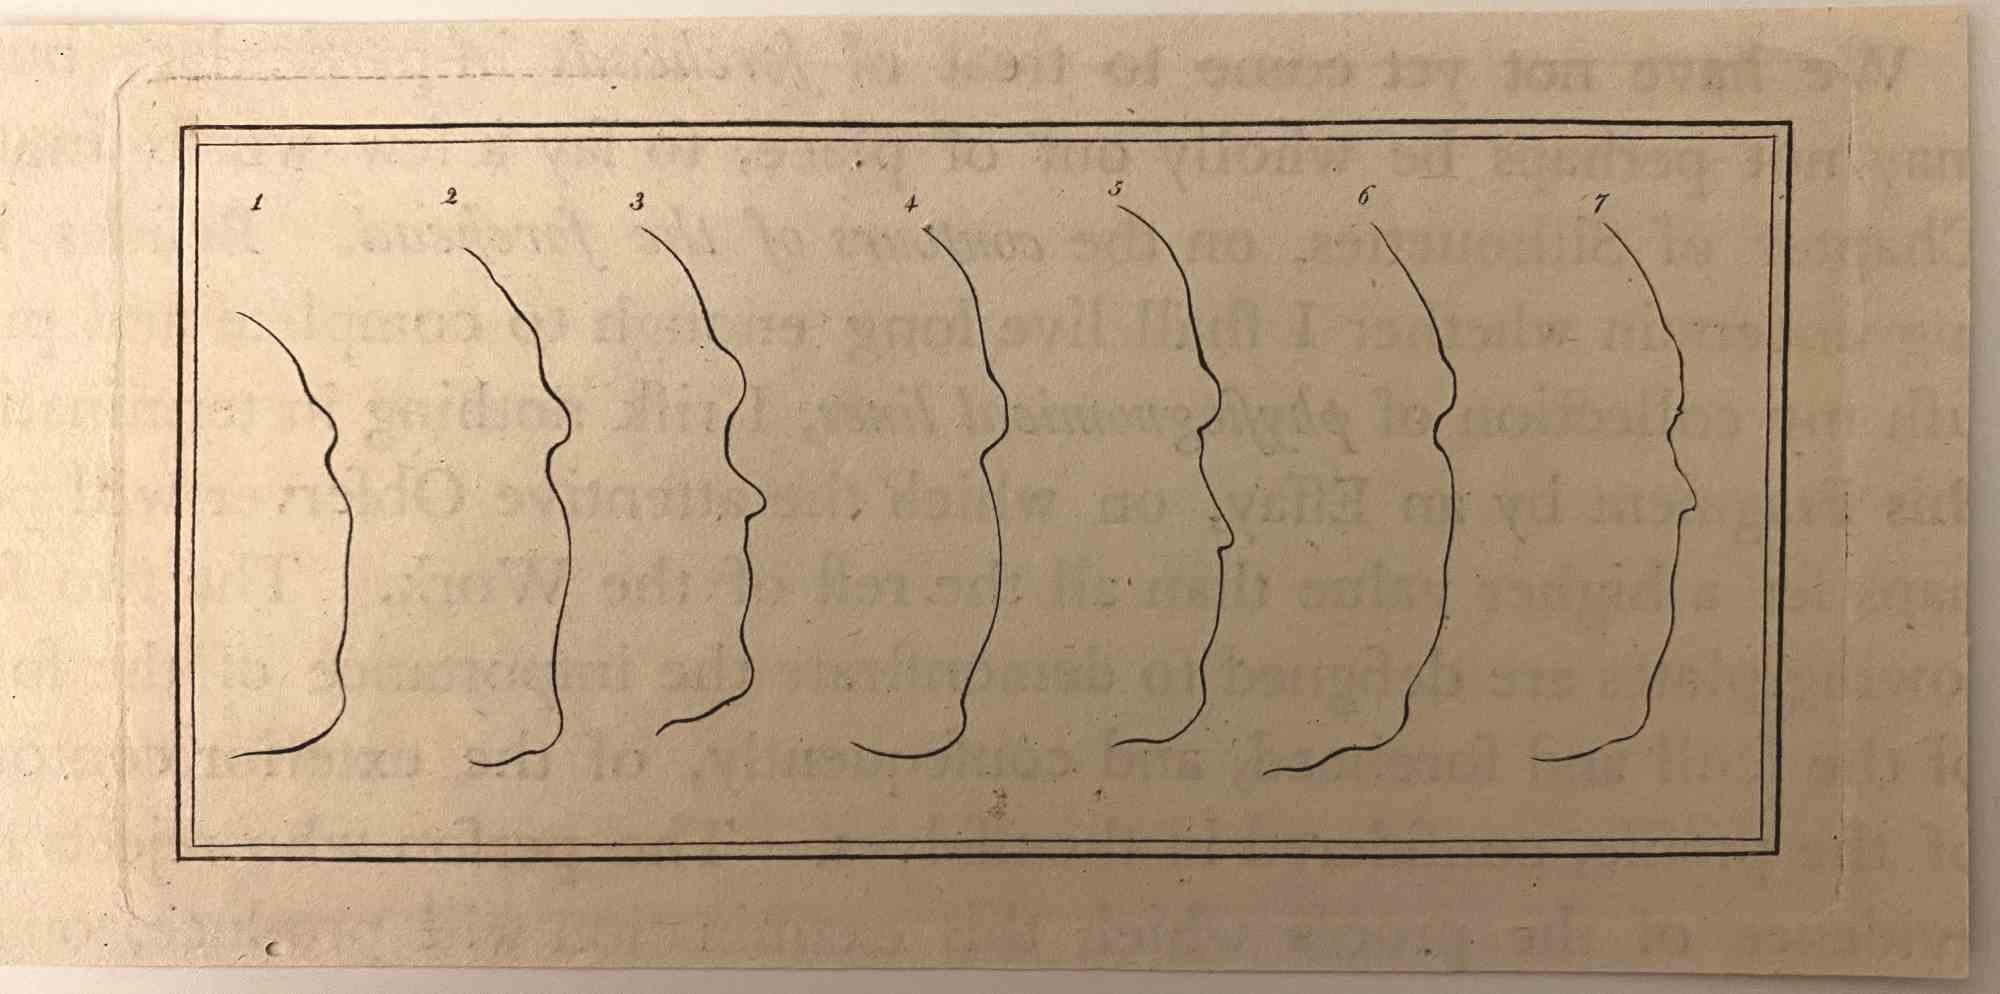 The Physiognomy - Profiles is an original etching artwork realized by Thomas Holloway for Johann Caspar Lavater's "Essays on Physiognomy, Designed to Promote the Knowledge and the Love of Mankind", London, Bensley, 1810. 

With the script on the